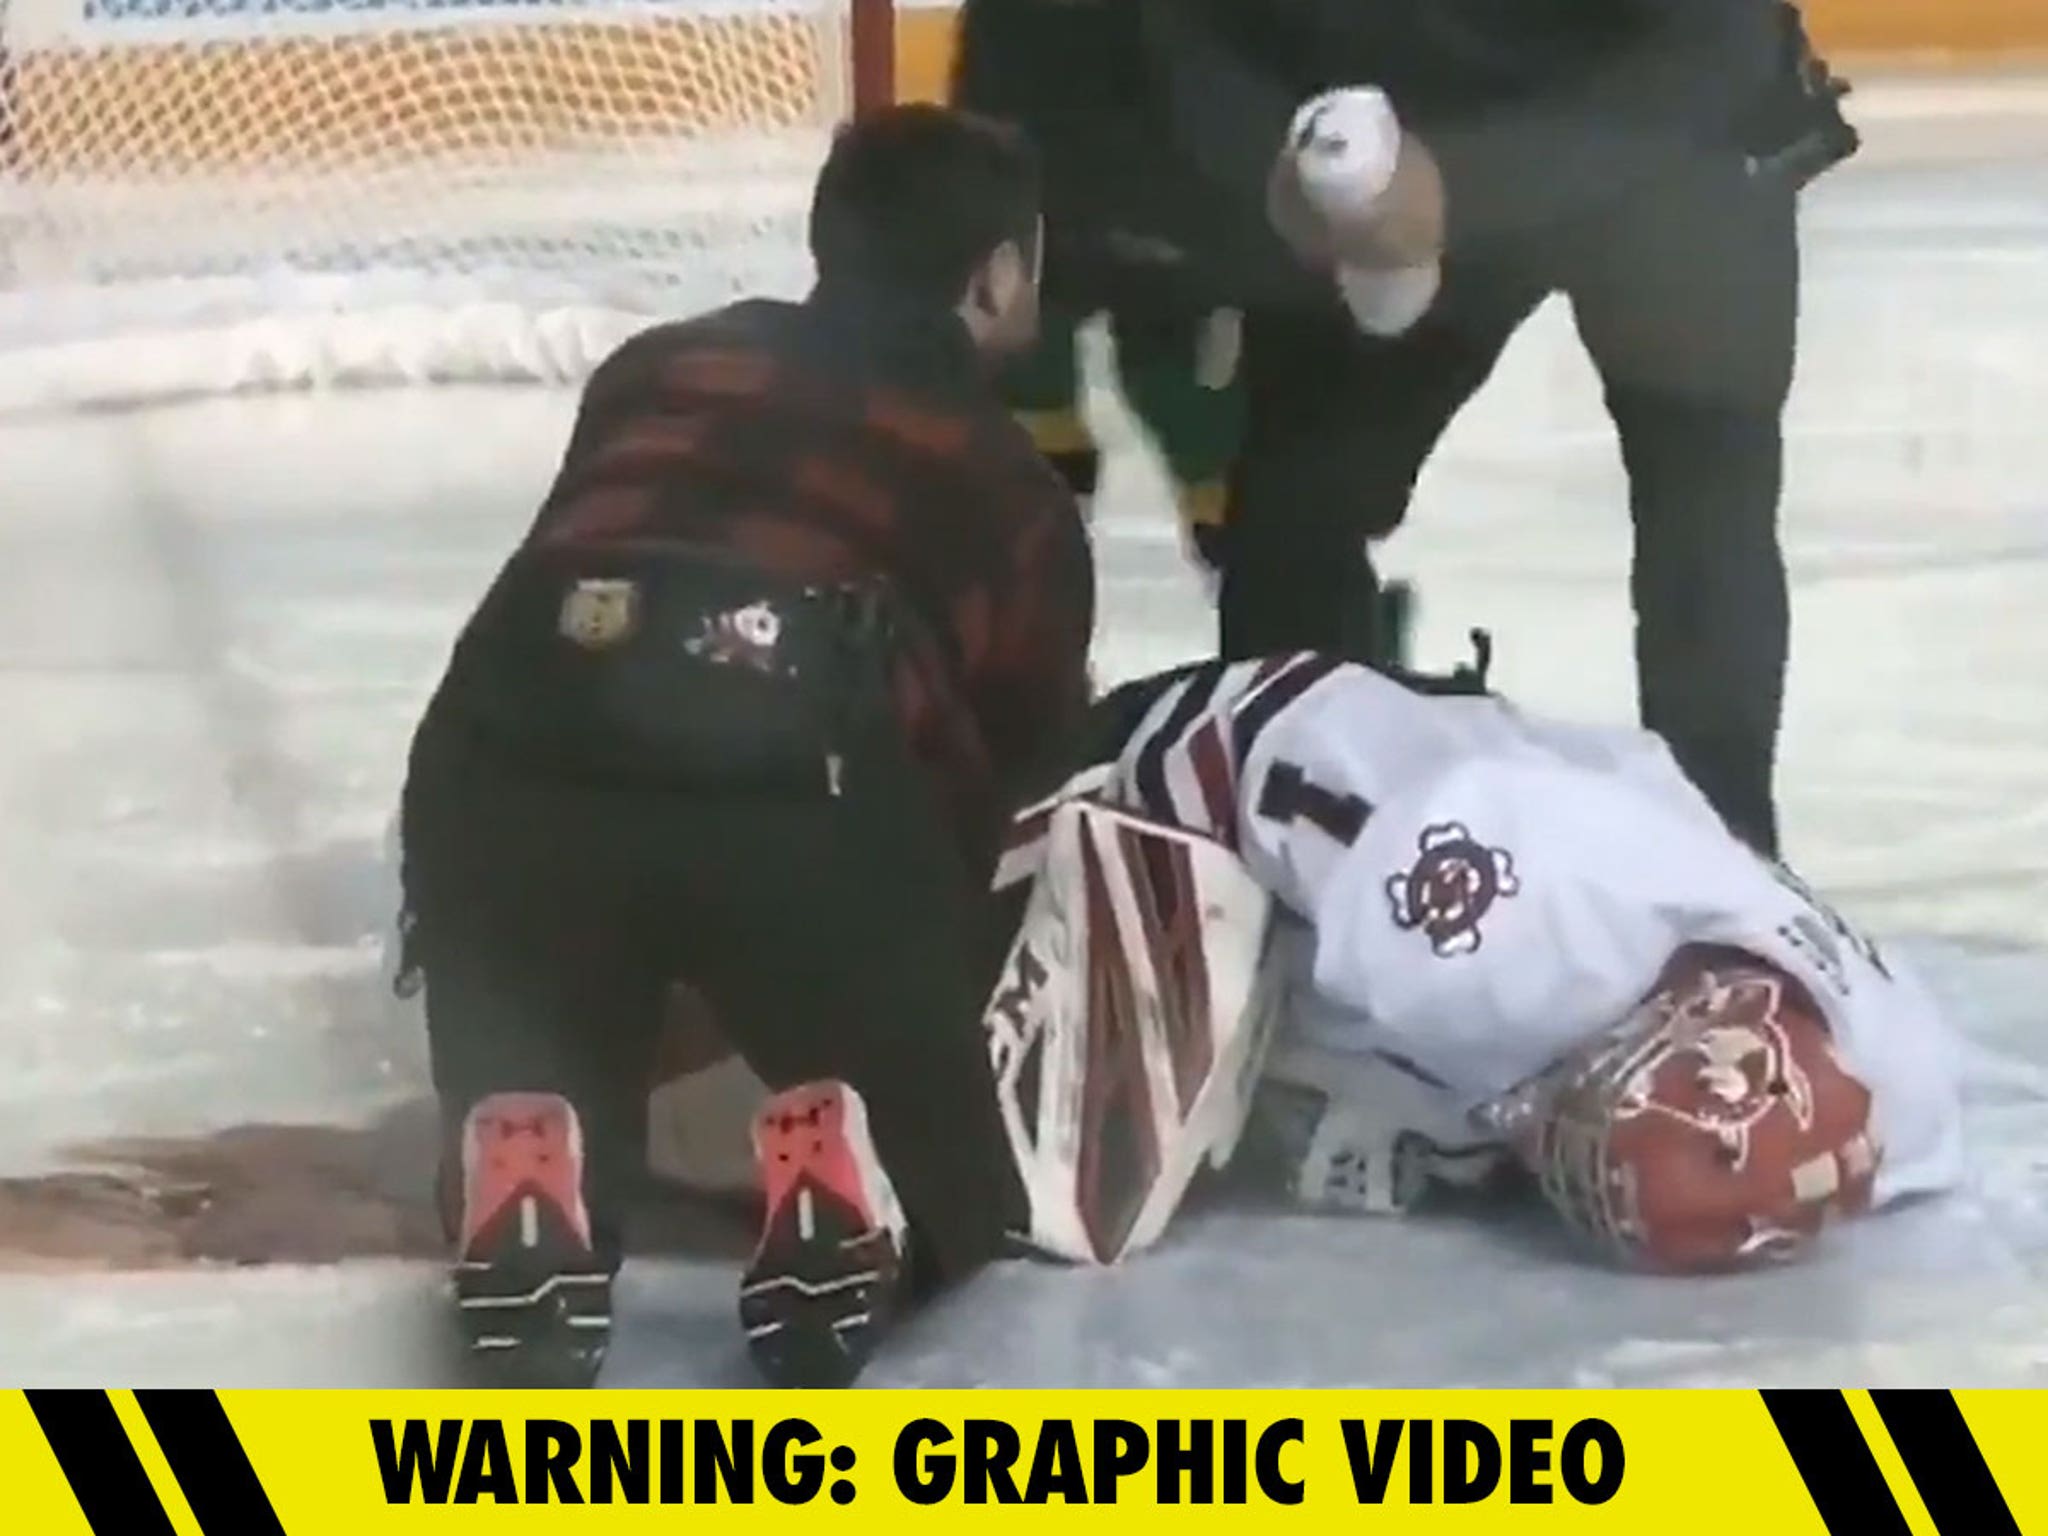 Ontario Hockey League Goalie Severely Cut By Skate In Game, Rushed To Surgery